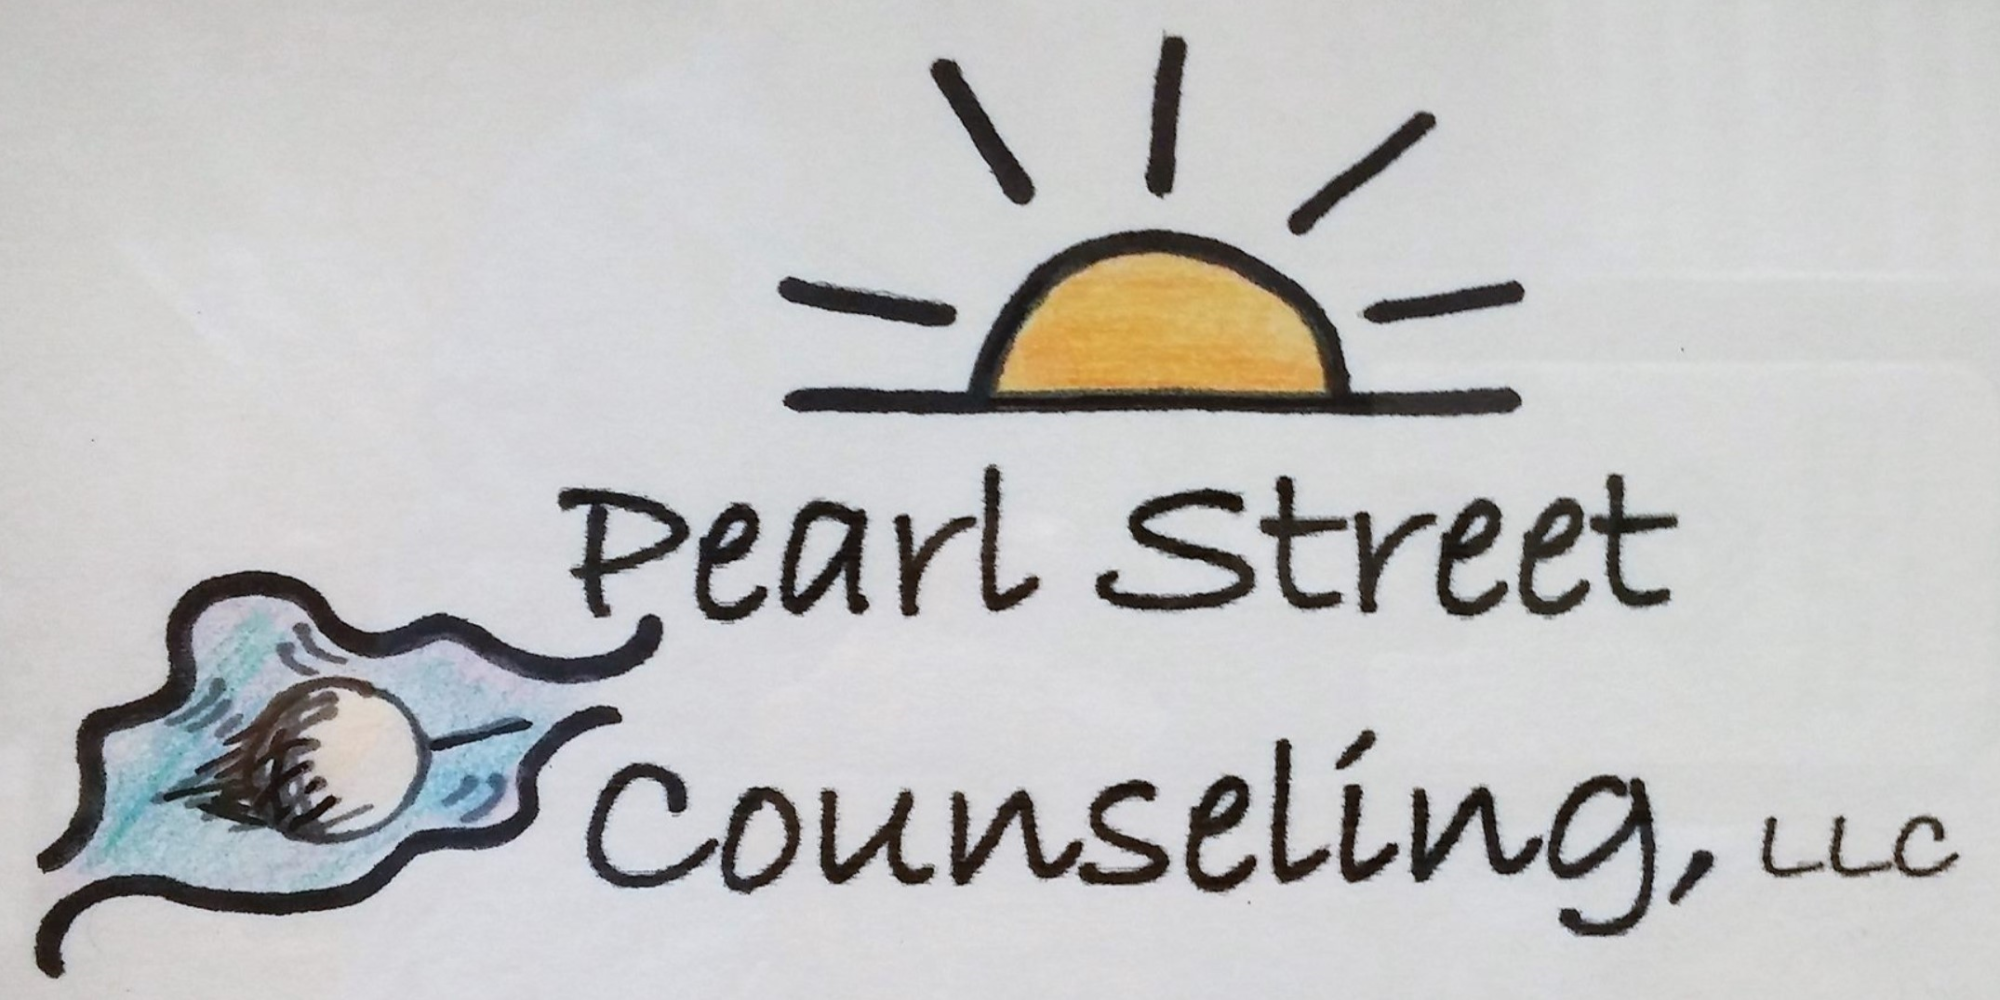 Pearl Street Counseling